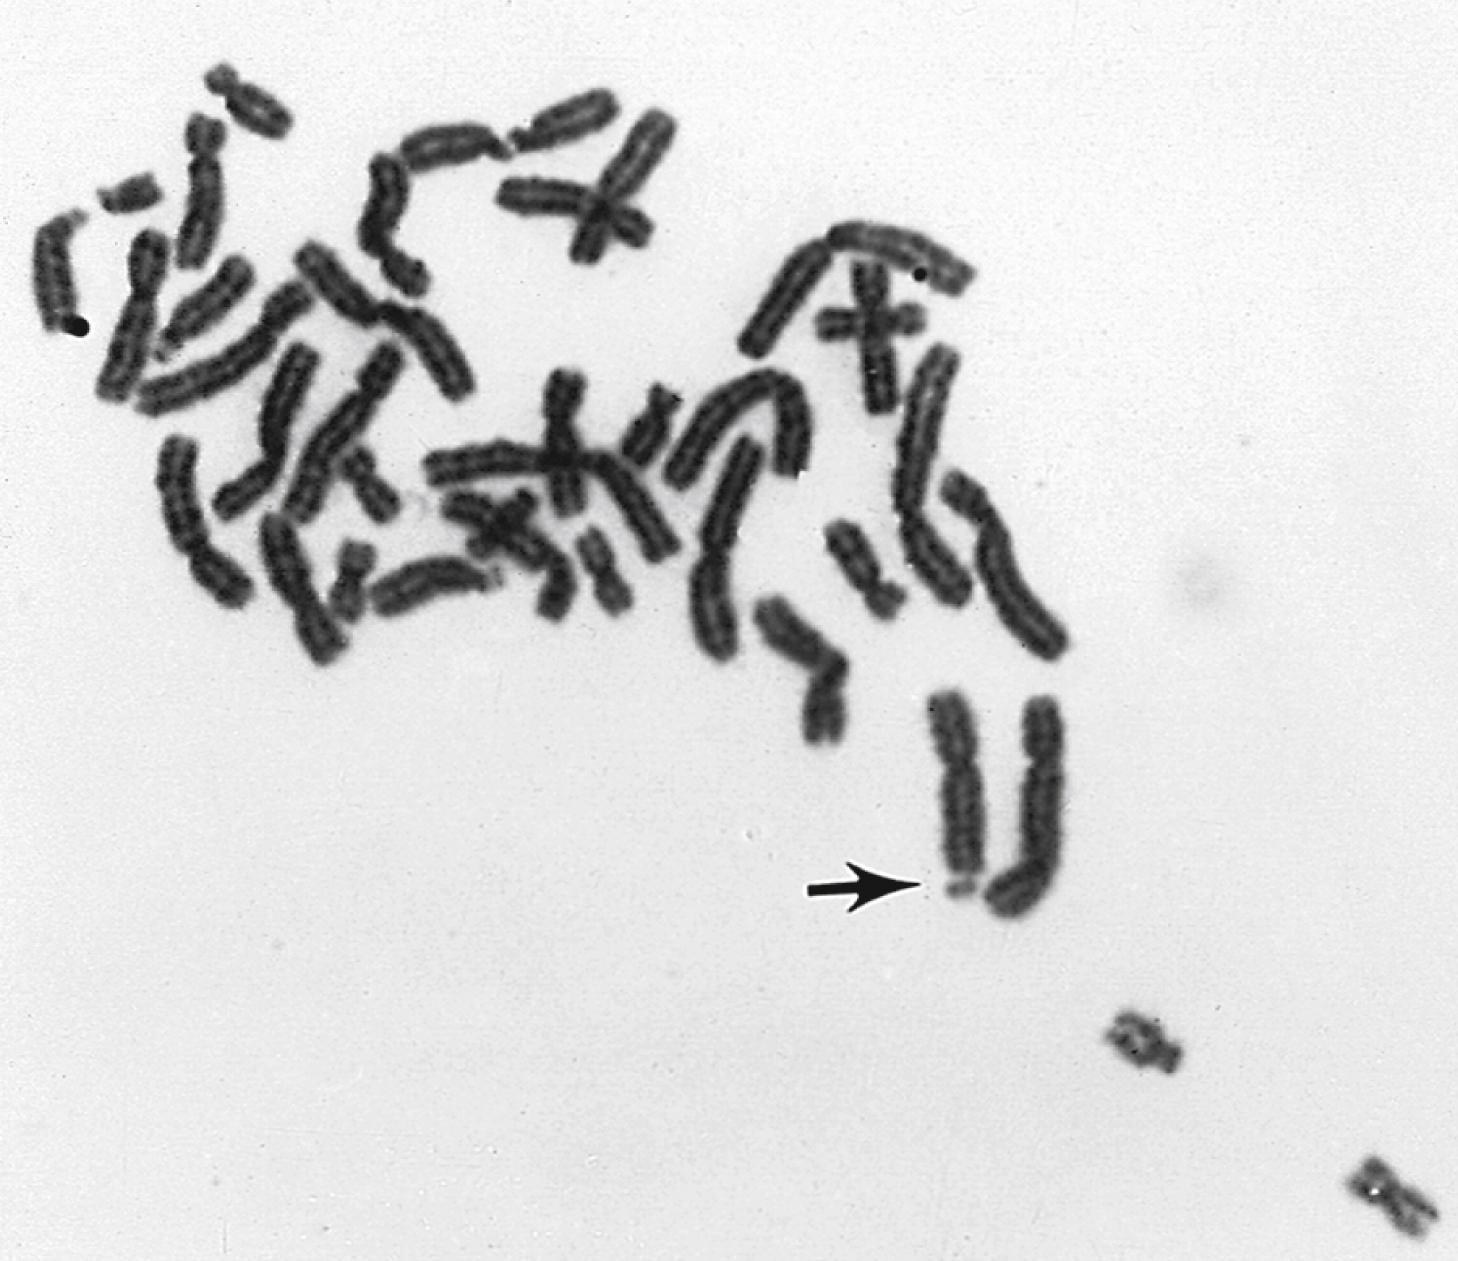 Fig. 1.23, Fragile X chromosome marker in lymphocyte culture. Partial metaphase plate shows the chromosome break at Xq27 (arrow) characteristic of fragile X syndrome (solid Giemsa stain).